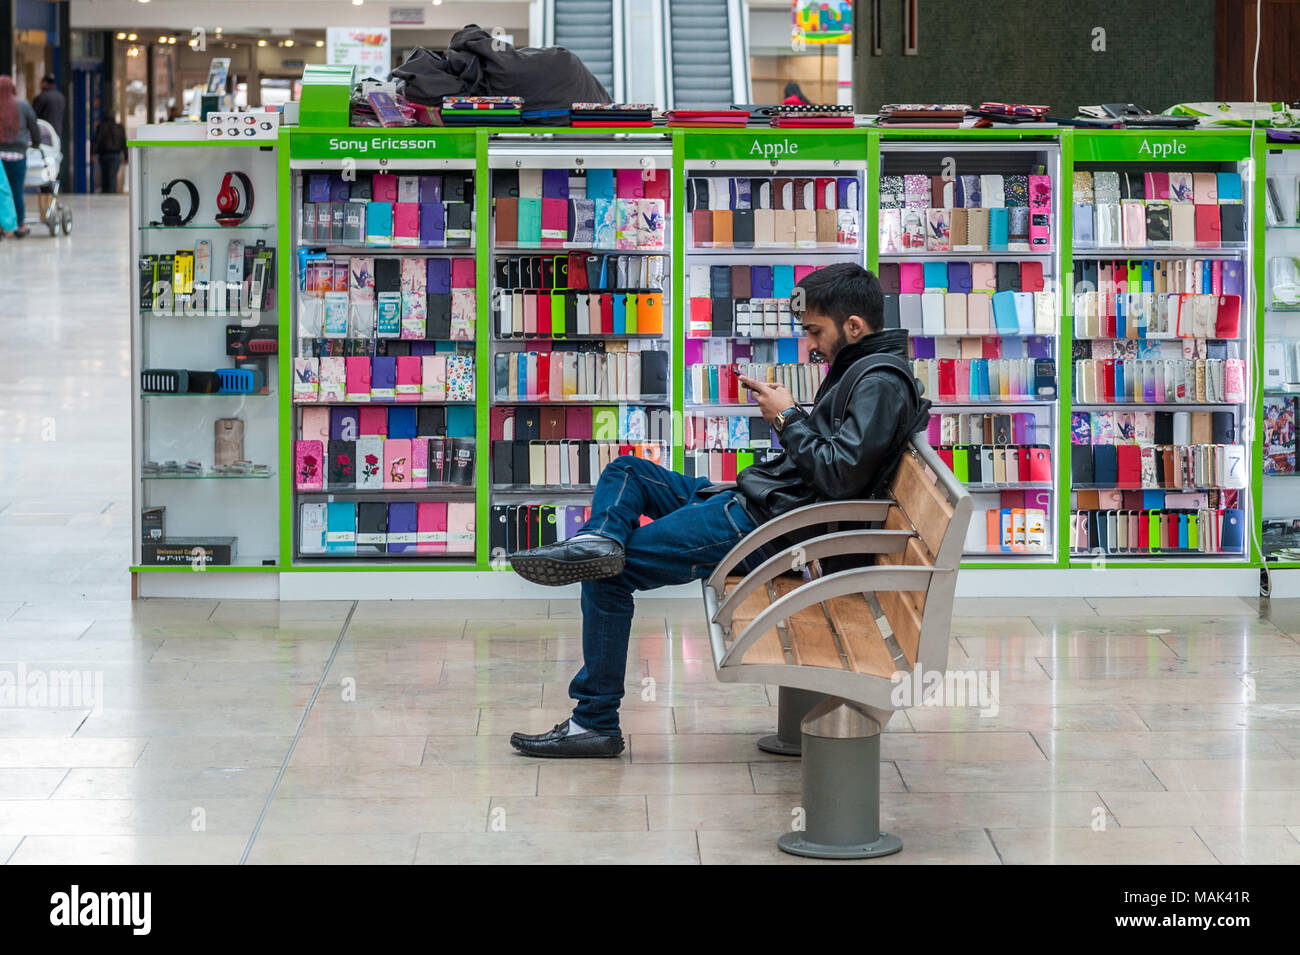 Mobile Phone cover/case stall with man sitting on bench using a mobile phone in Lower Precinct, Coventry, West Midlands, UK. Stock Photo